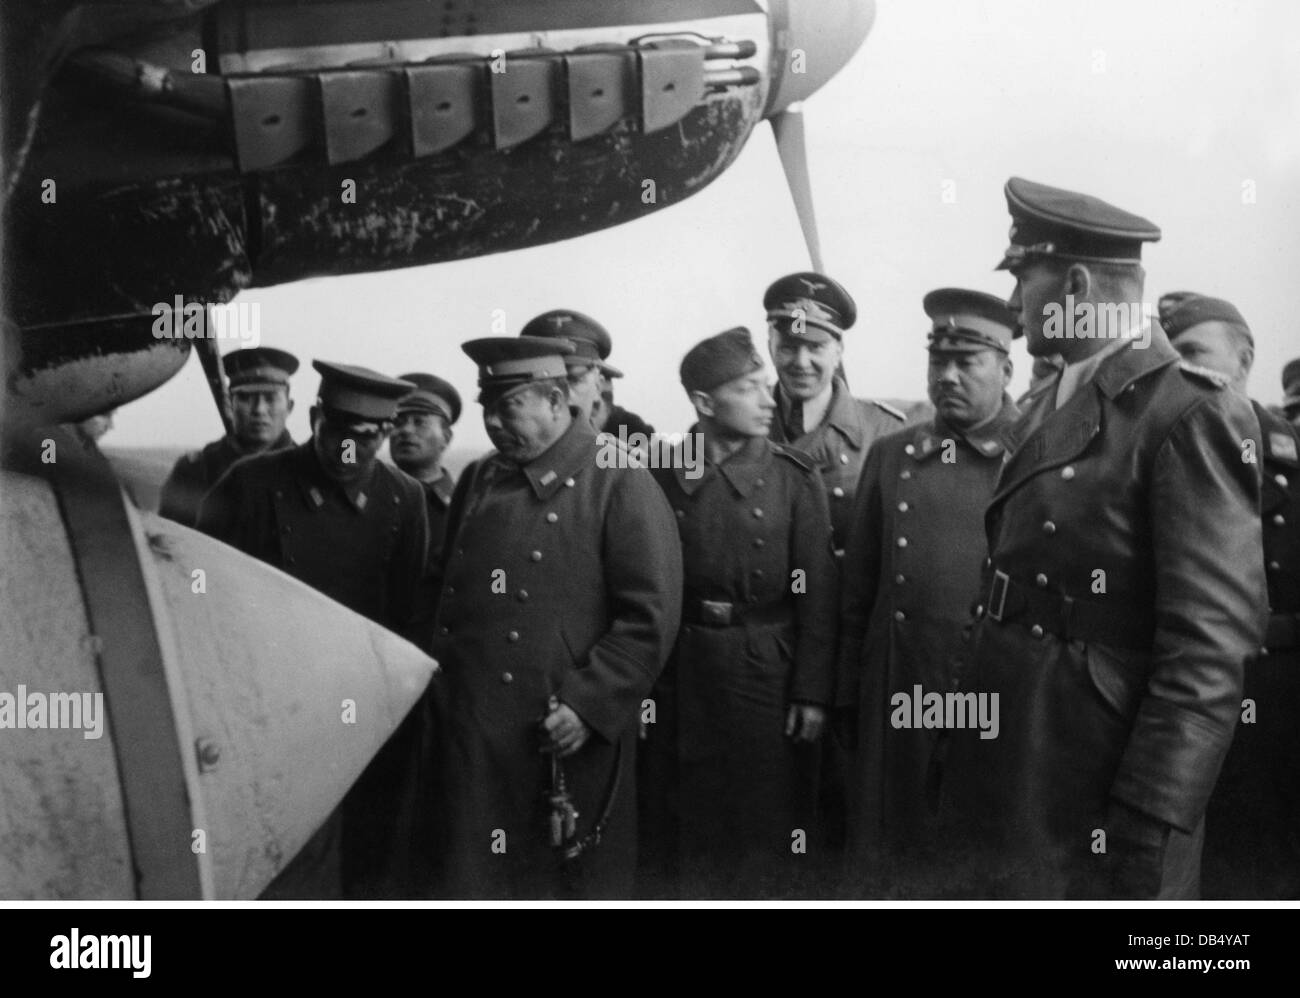 Nazism / National Socialism, politics, Tripartite Pact, visit of the Japanese general Yamashita Tomoyuki at the II group of 53rd German Bomber Wing, Calais area, France, December 1940, Additional-Rights-Clearences-Not Available Stock Photo